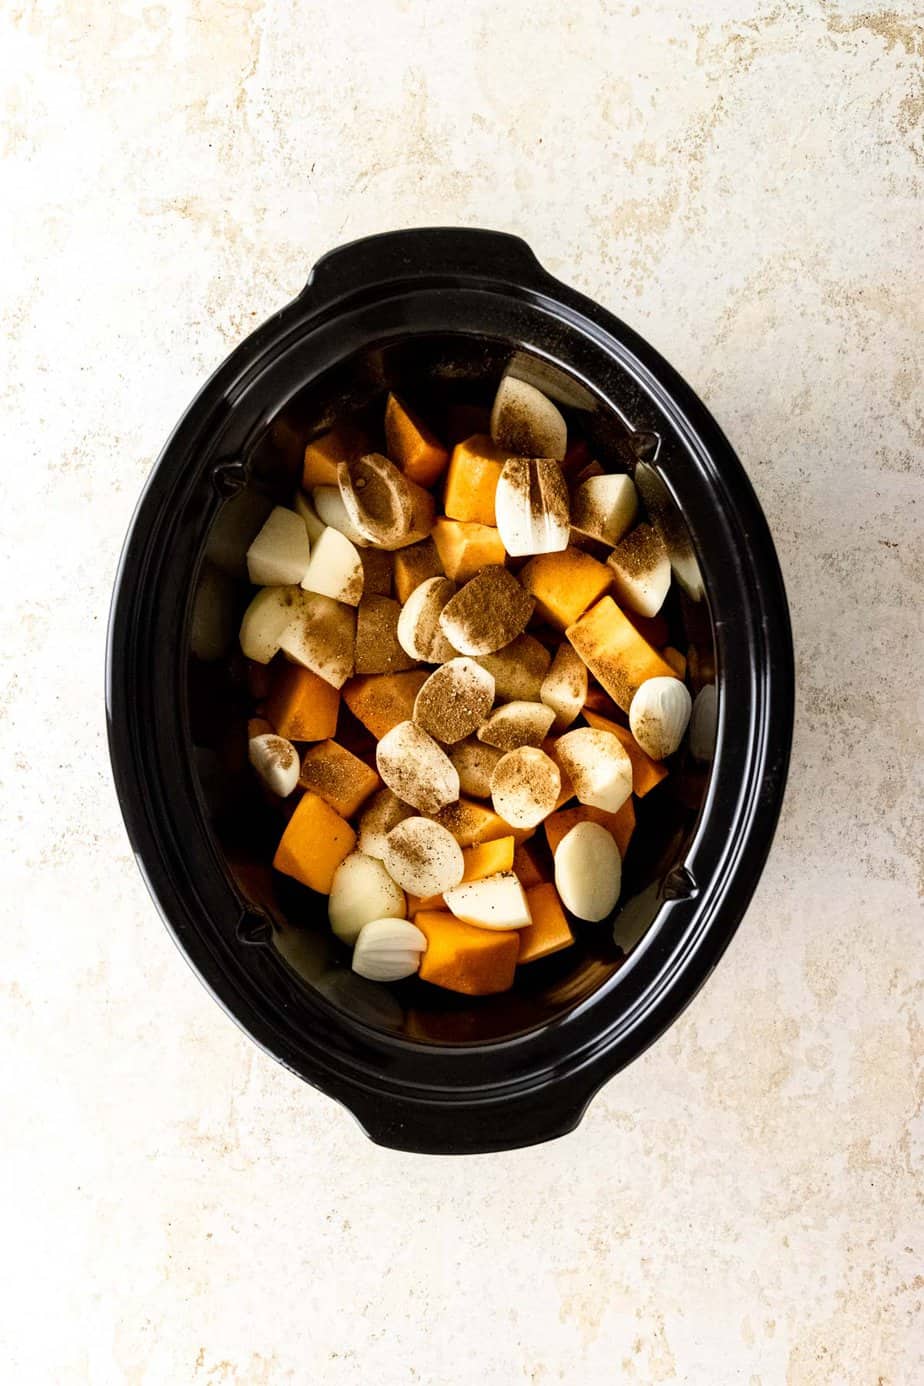 Chunks of pumpkin and potato in a slow cooker with spices and seasoning on top.